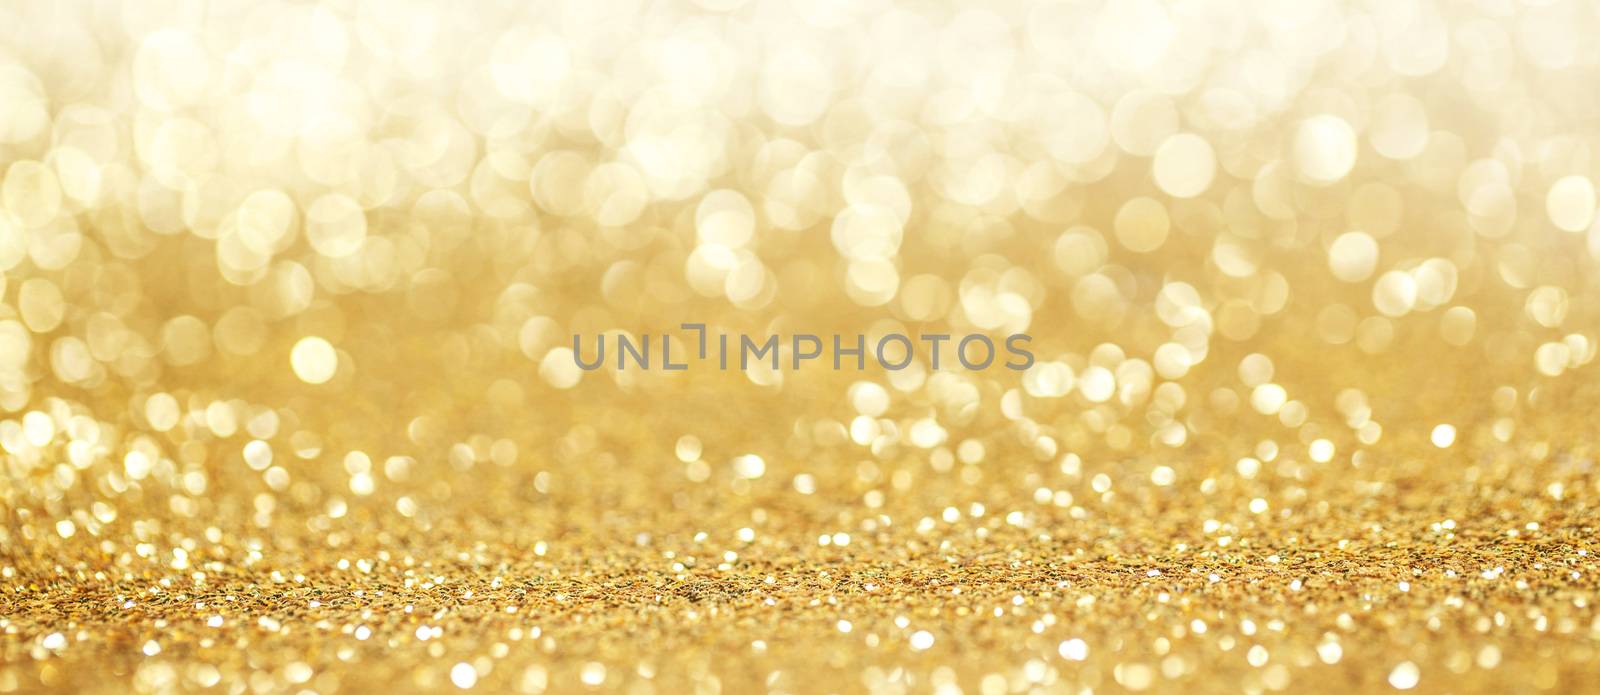 Abstract golden glitter background by Yellowj